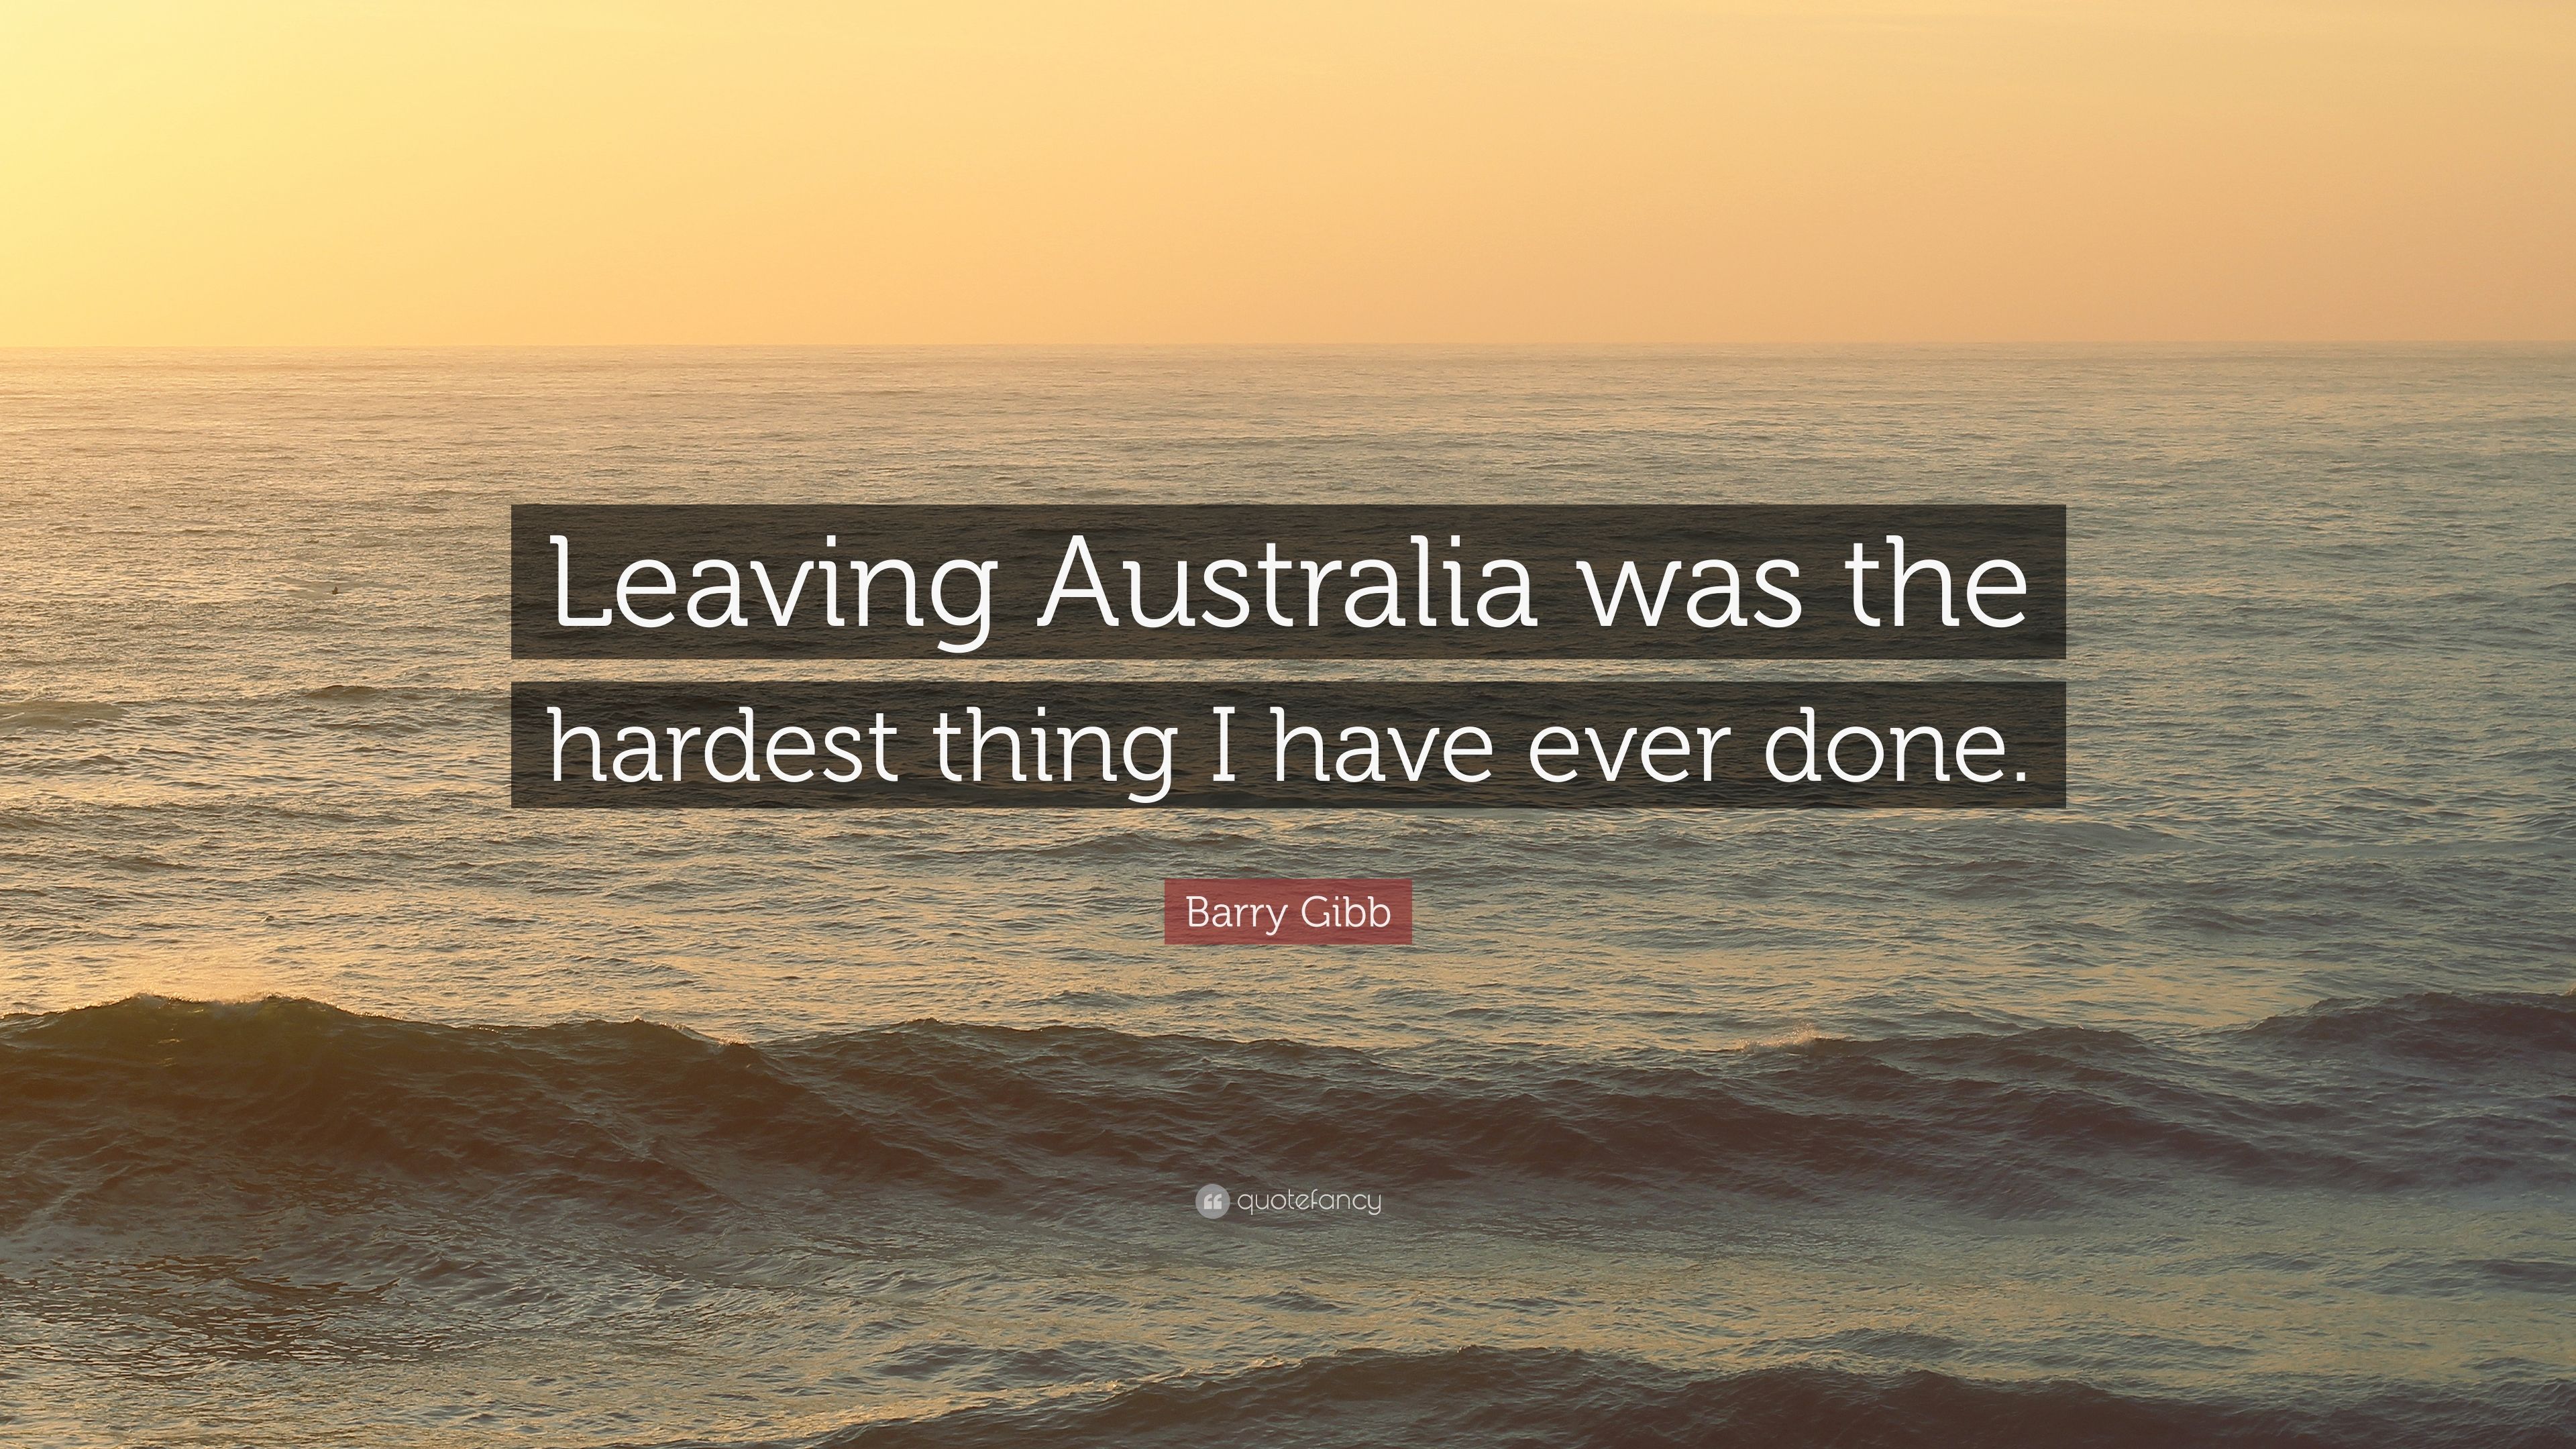 Barry Gibb Quote: “Leaving Australia was the hardest thing I have